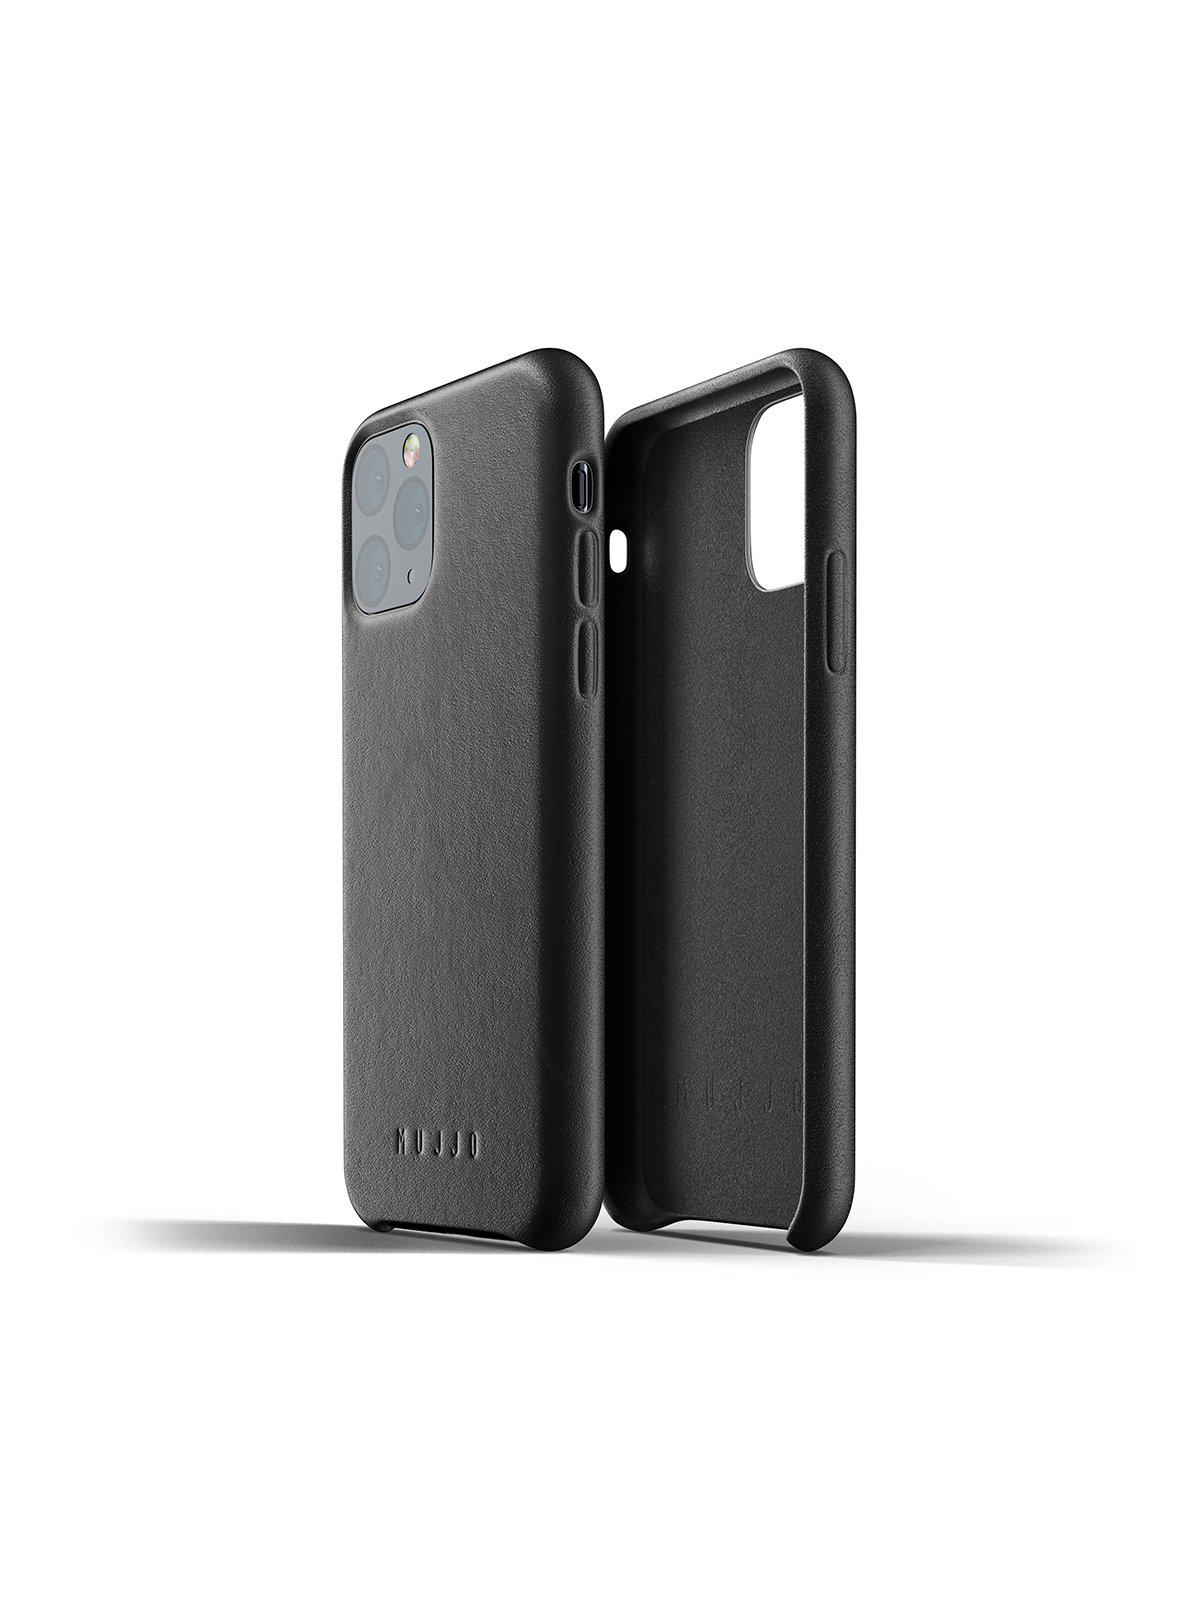 Mujjo Full Leather Case for iPhone 11 Pro Black - MORE by Morello Indonesia